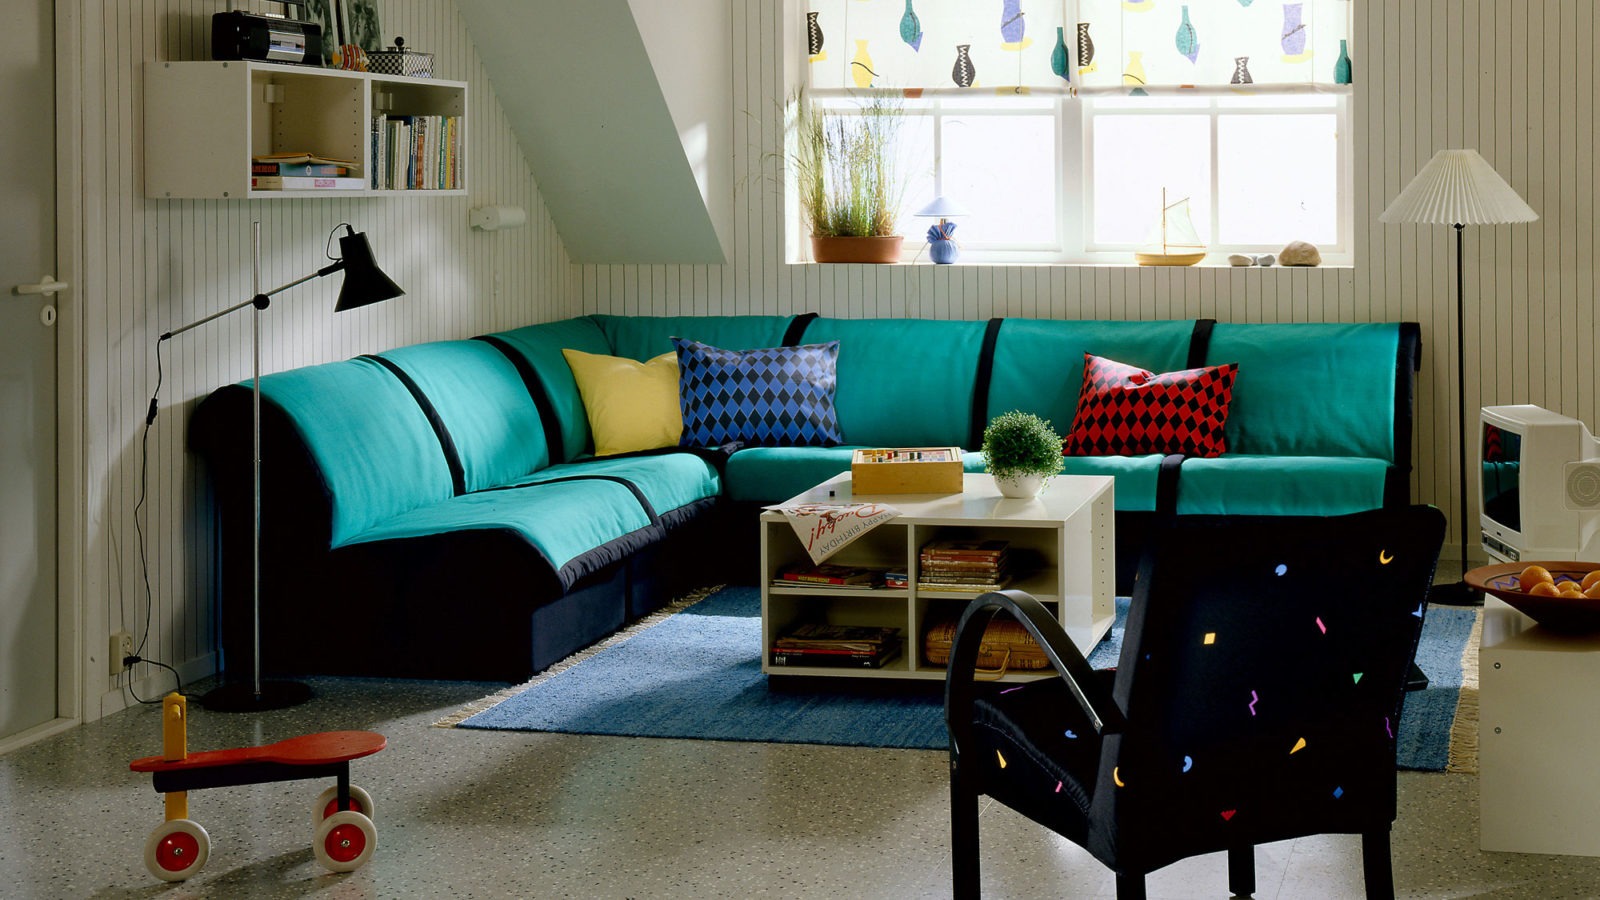 A light room with a black and green modular sofa, model LEXBY, arranged as a corner sofa. Colourful patterned textiles.